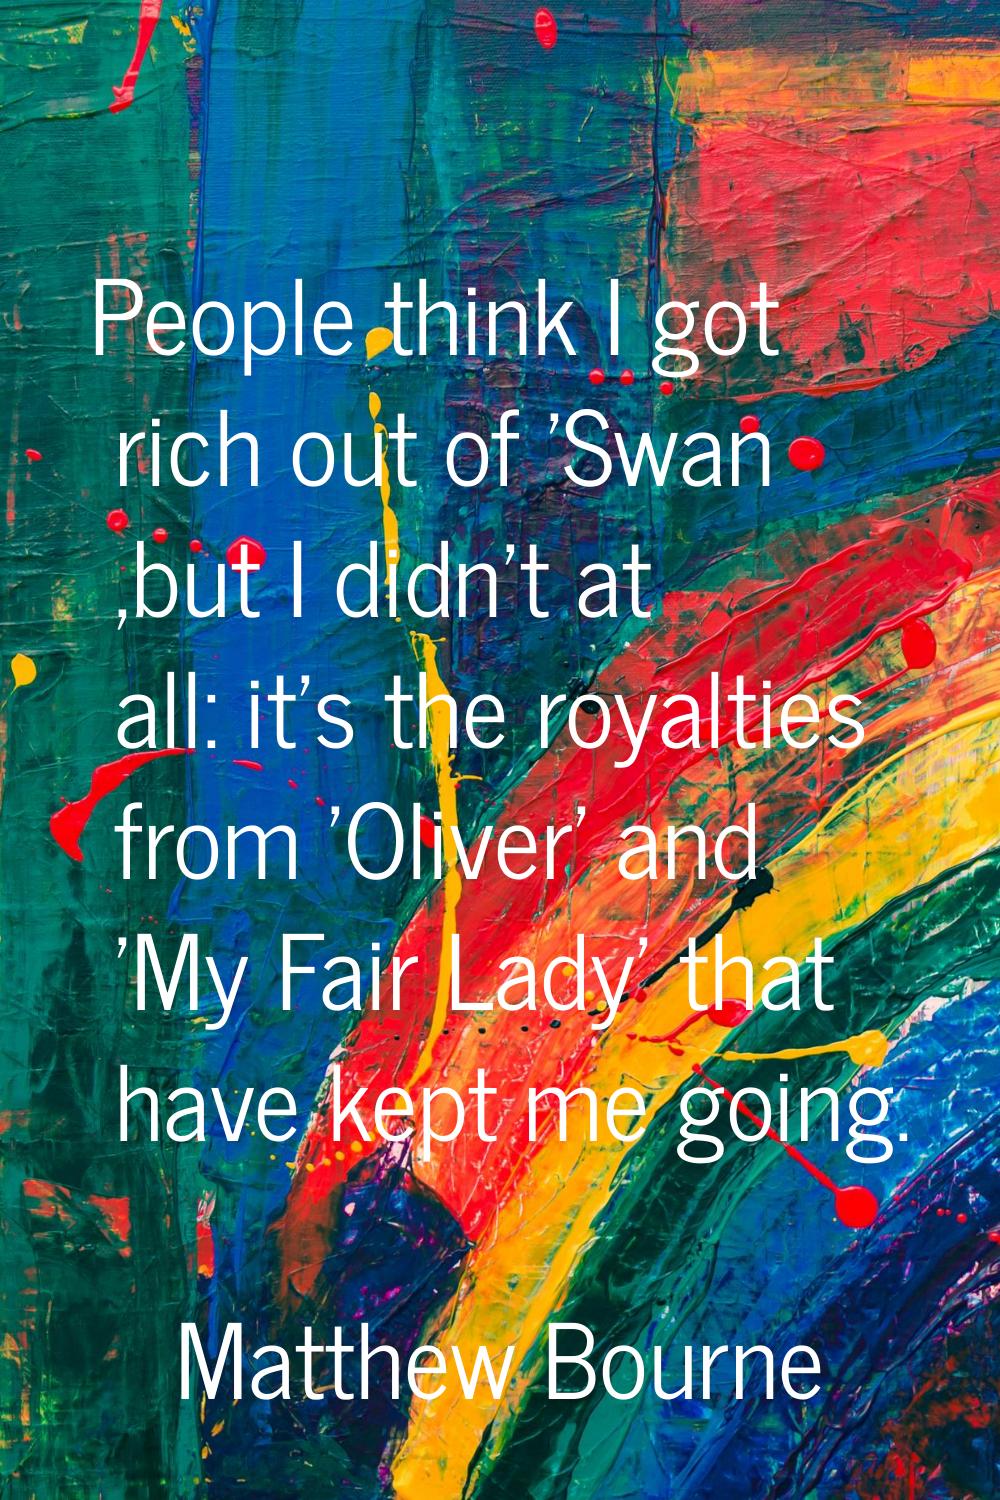 People think I got rich out of 'Swan ,but I didn't at all: it's the royalties from 'Oliver' and 'My